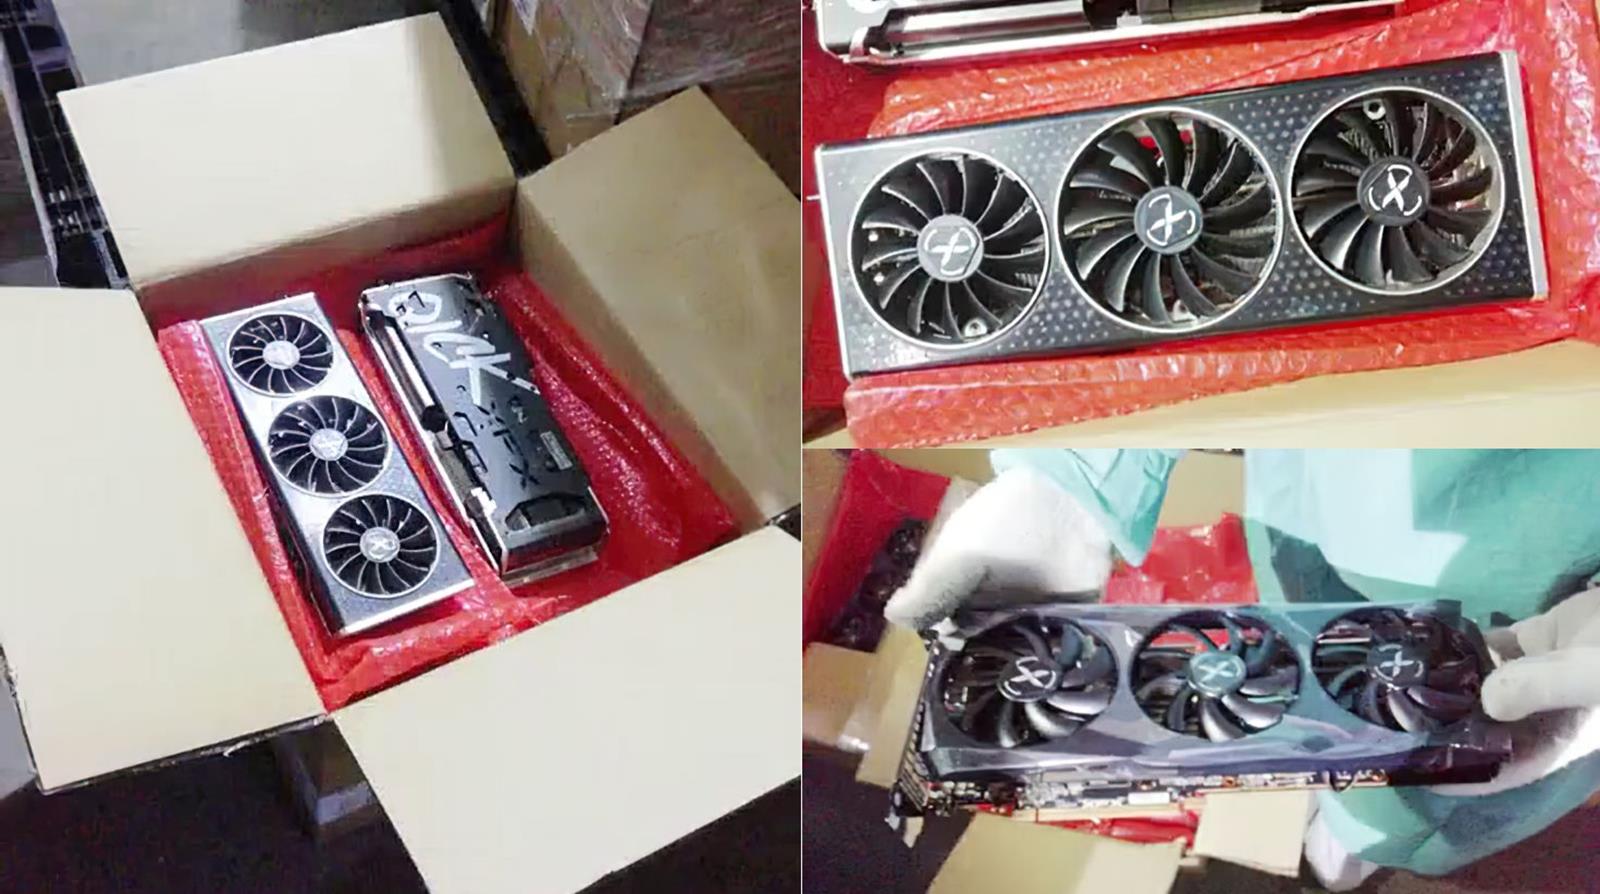 Chinese customs officers took over 5,840 XFX graphics cards for over PLN 13 million